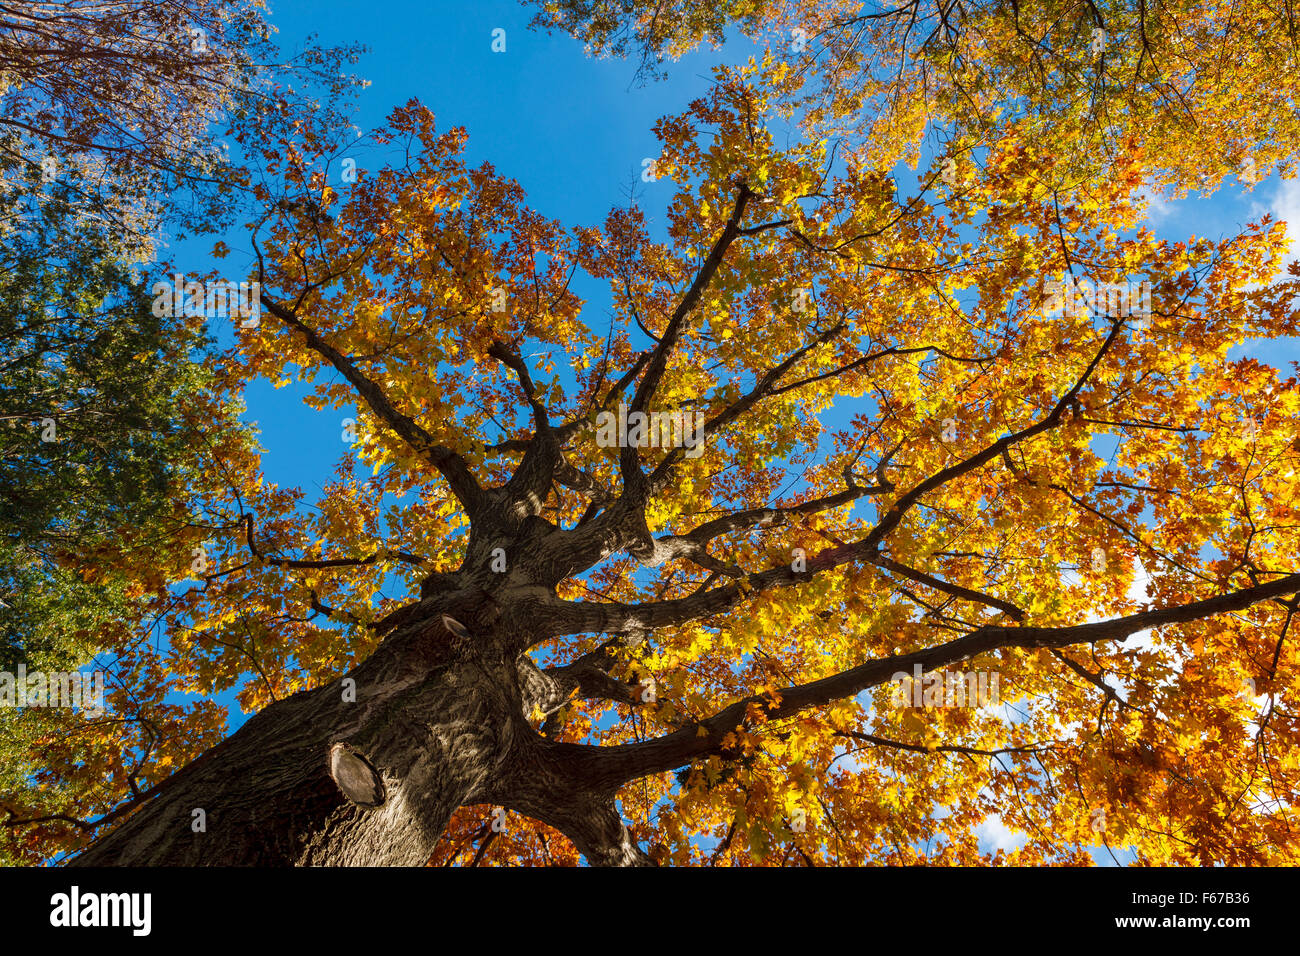 View through colorful Fall foliage of oak tree in Central Park, New York City. Stock Photo